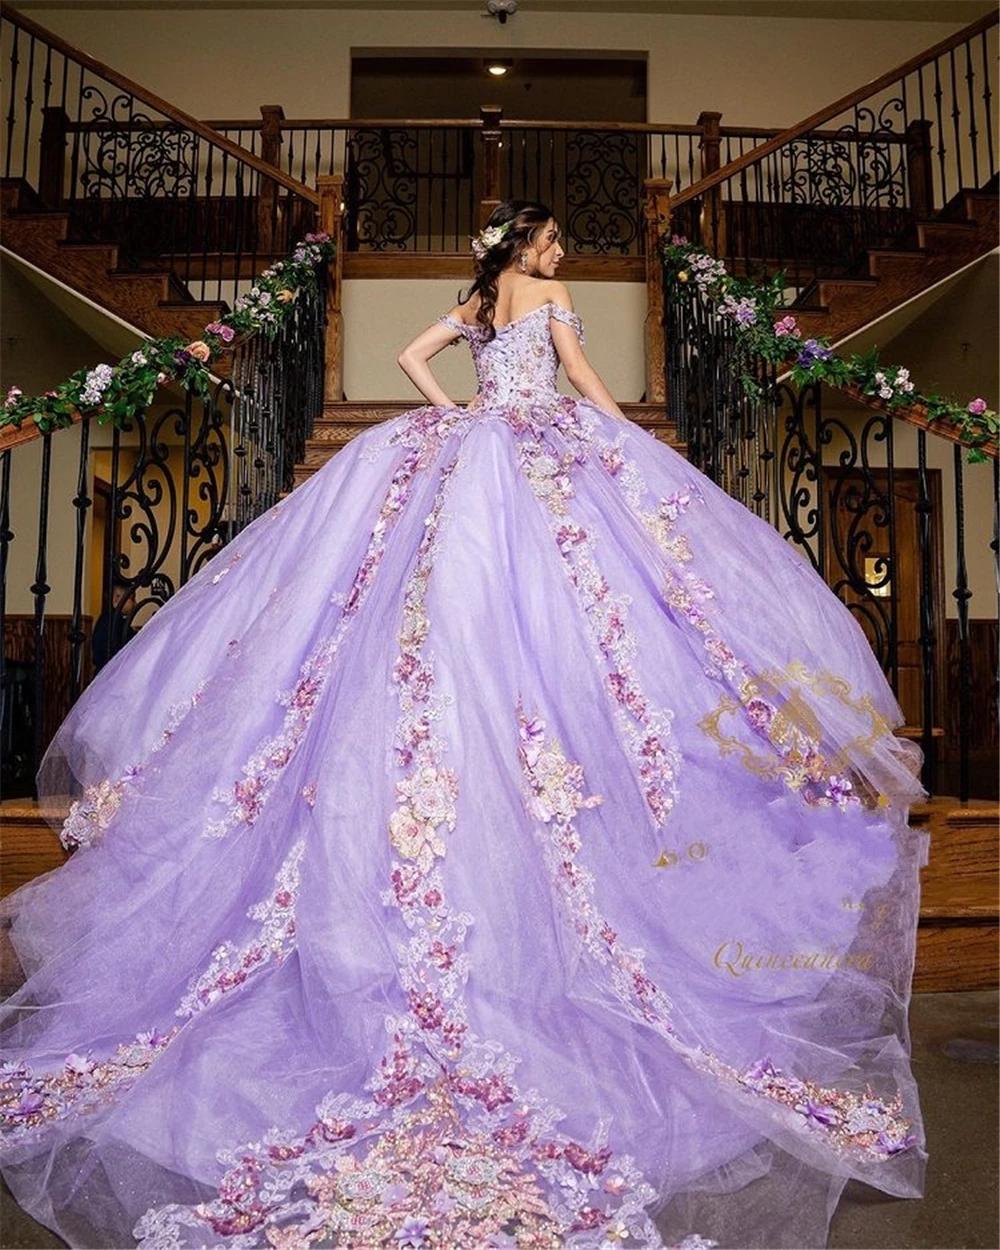 

Lavender Lilac Beaded Puffy Ball Gown Quinceanera Dresses Beads lace-up corset Sweet 16 Dress Pageant Gowns vestido de 15 anos XV, Ivory